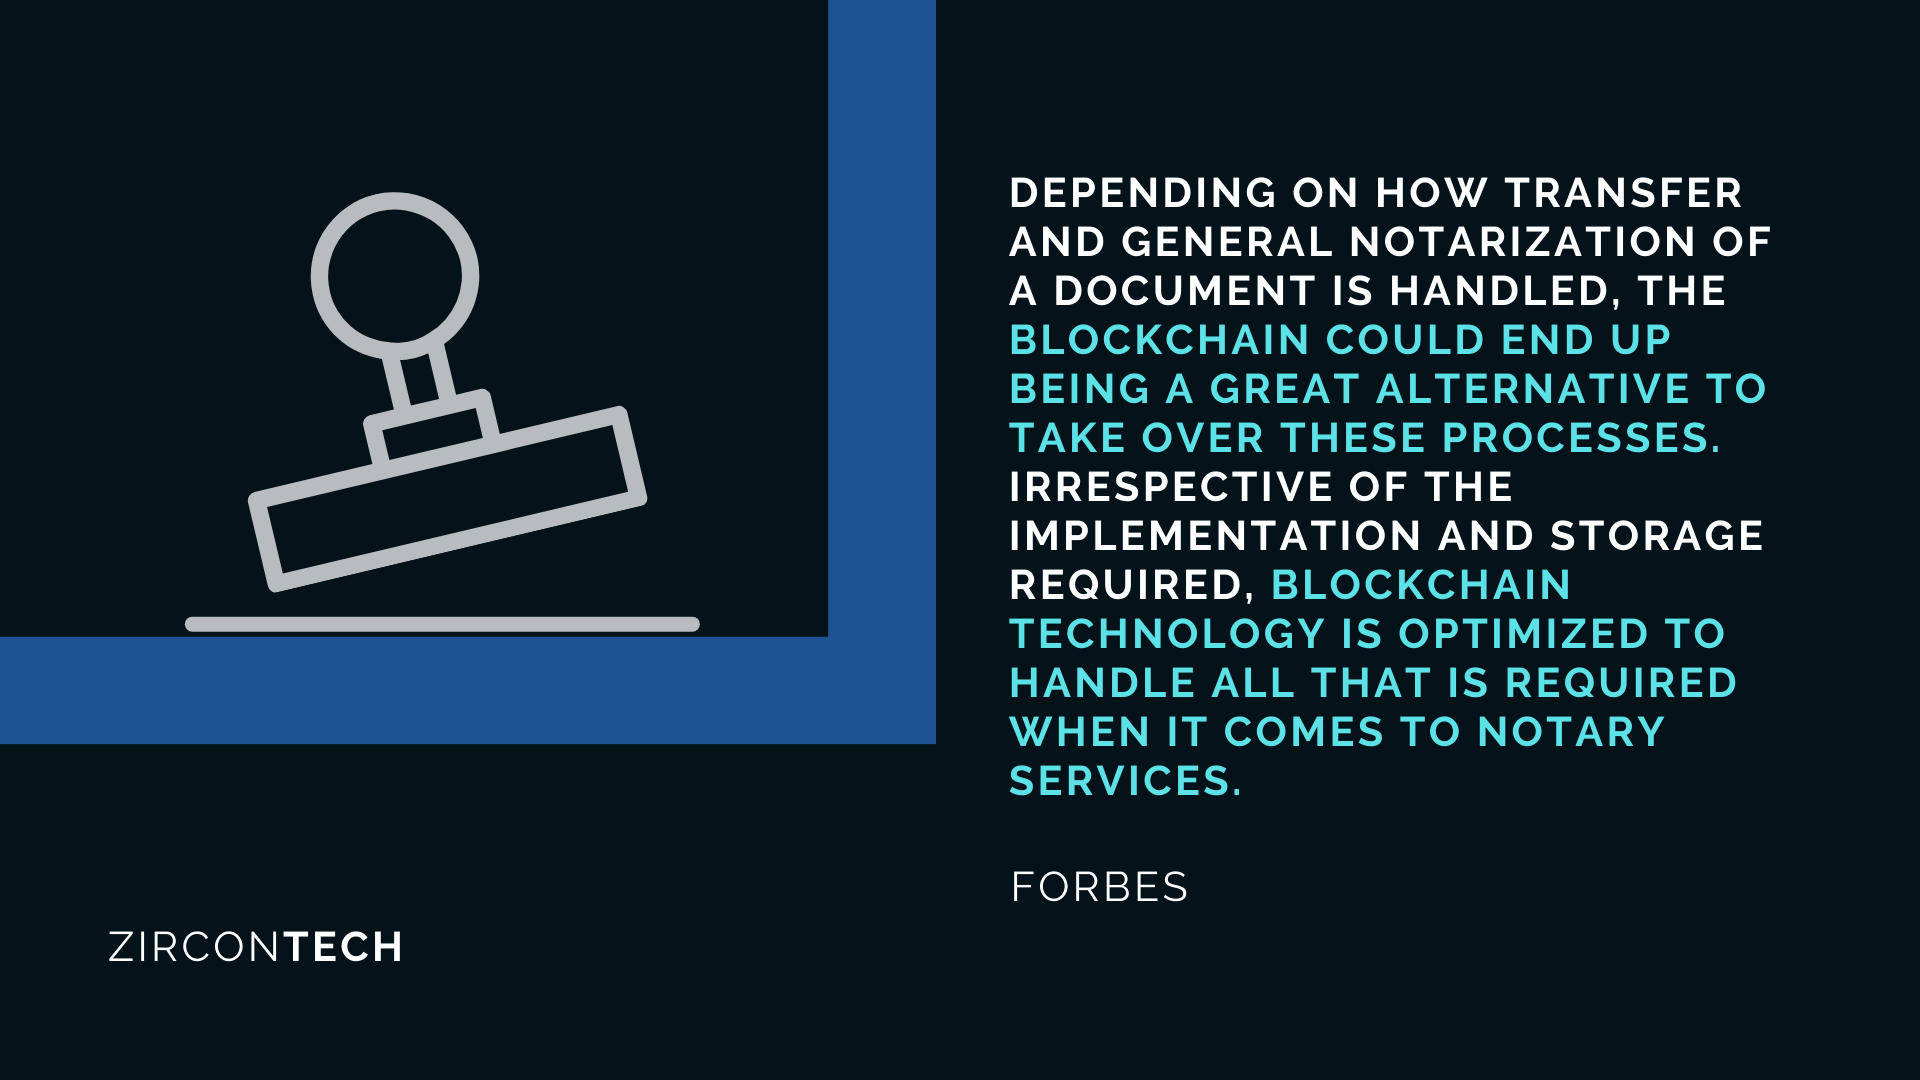 Blockchain technology is optimized to handle all that is required when it comes to notary services